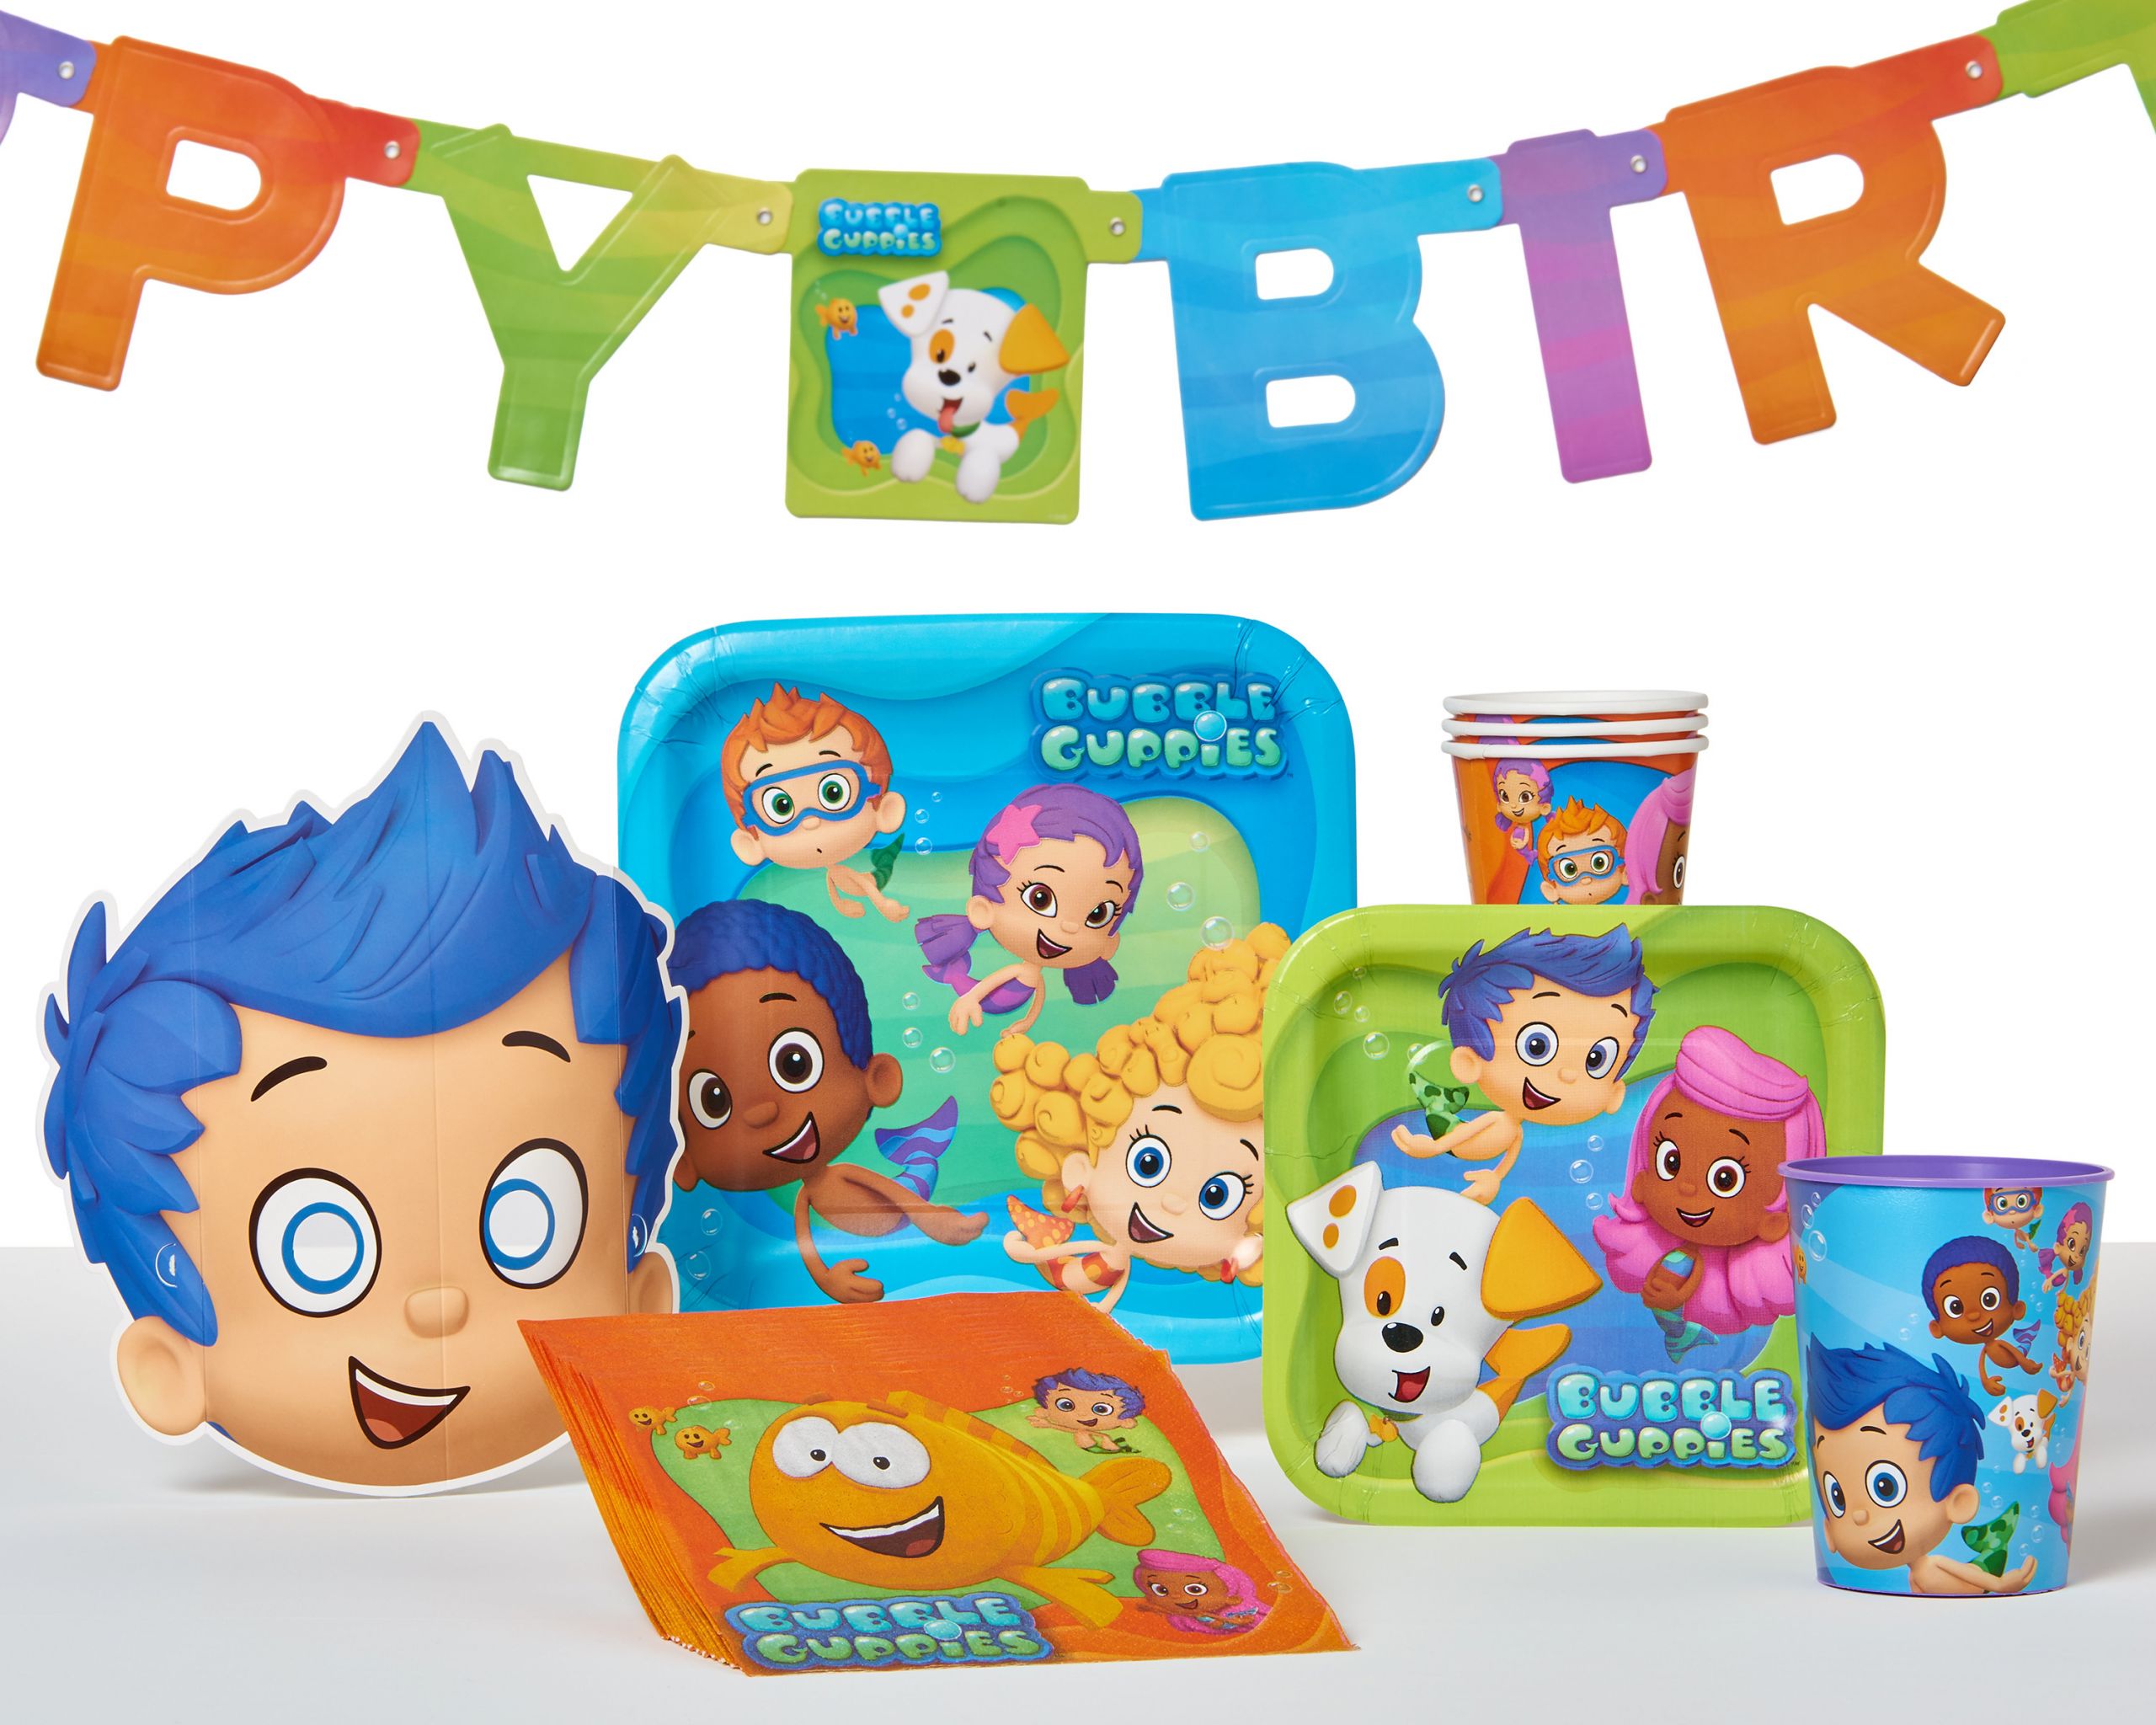 Bubble Guppies Birthday Party Supplies
 Bubble Guppies Party Supplies Walmart